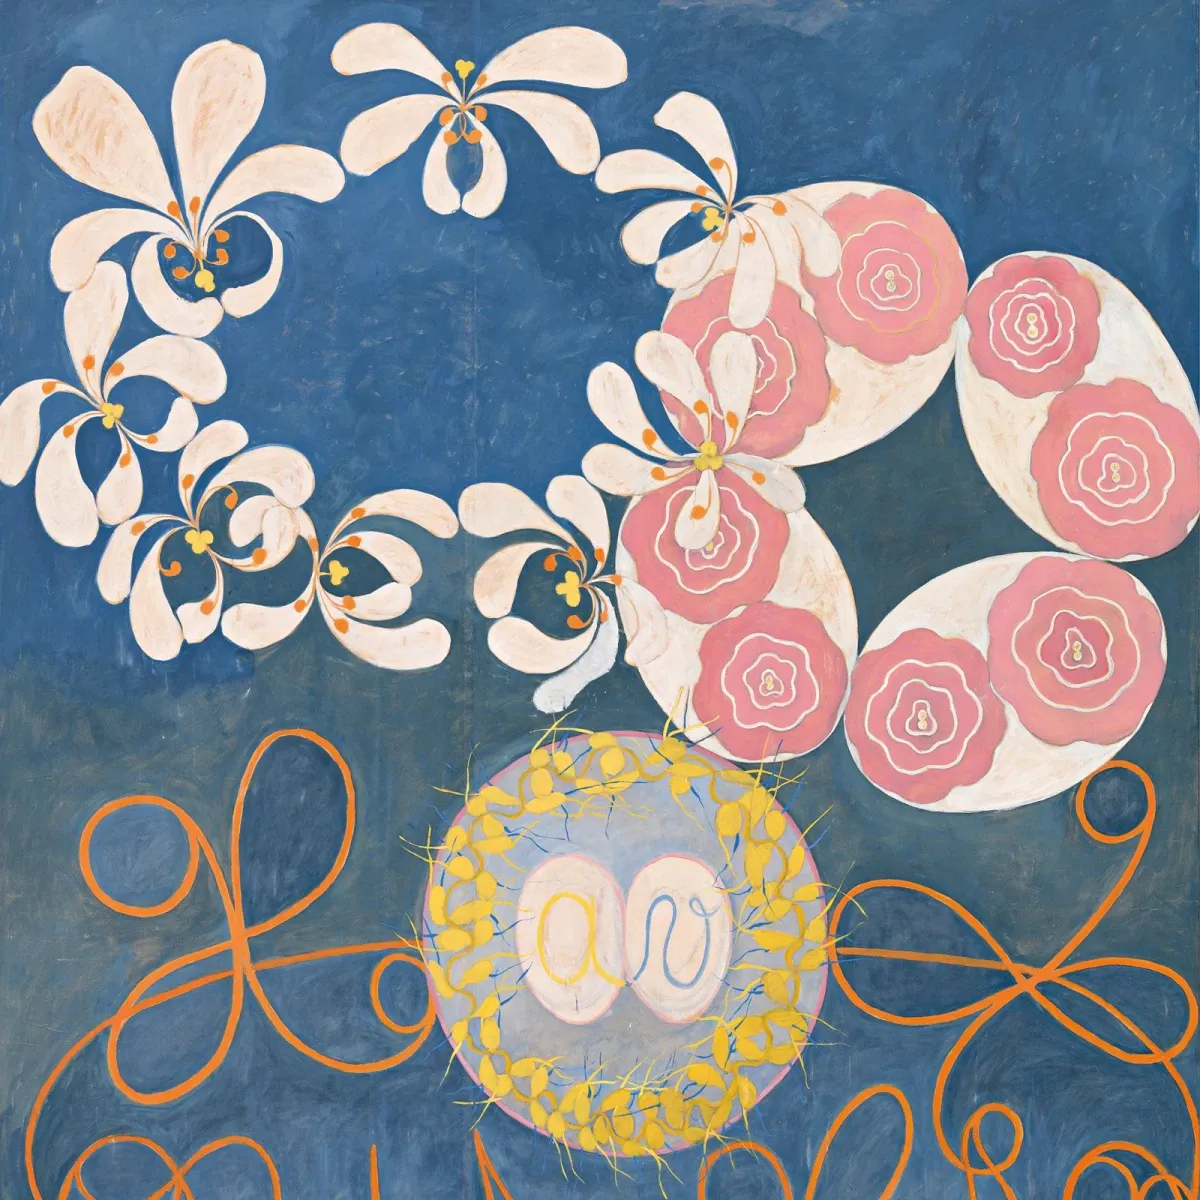 A blue background, orange lines swirl through like yarn looping. White flowers with yellow stamens seem to dance in a circle which intersects with a circle of pink roses, each pair of roses contained in a white circle. A light blue circle contains the form of two eggs, one with A one with V inside, surrounded by what looks like sperm in yellow. 